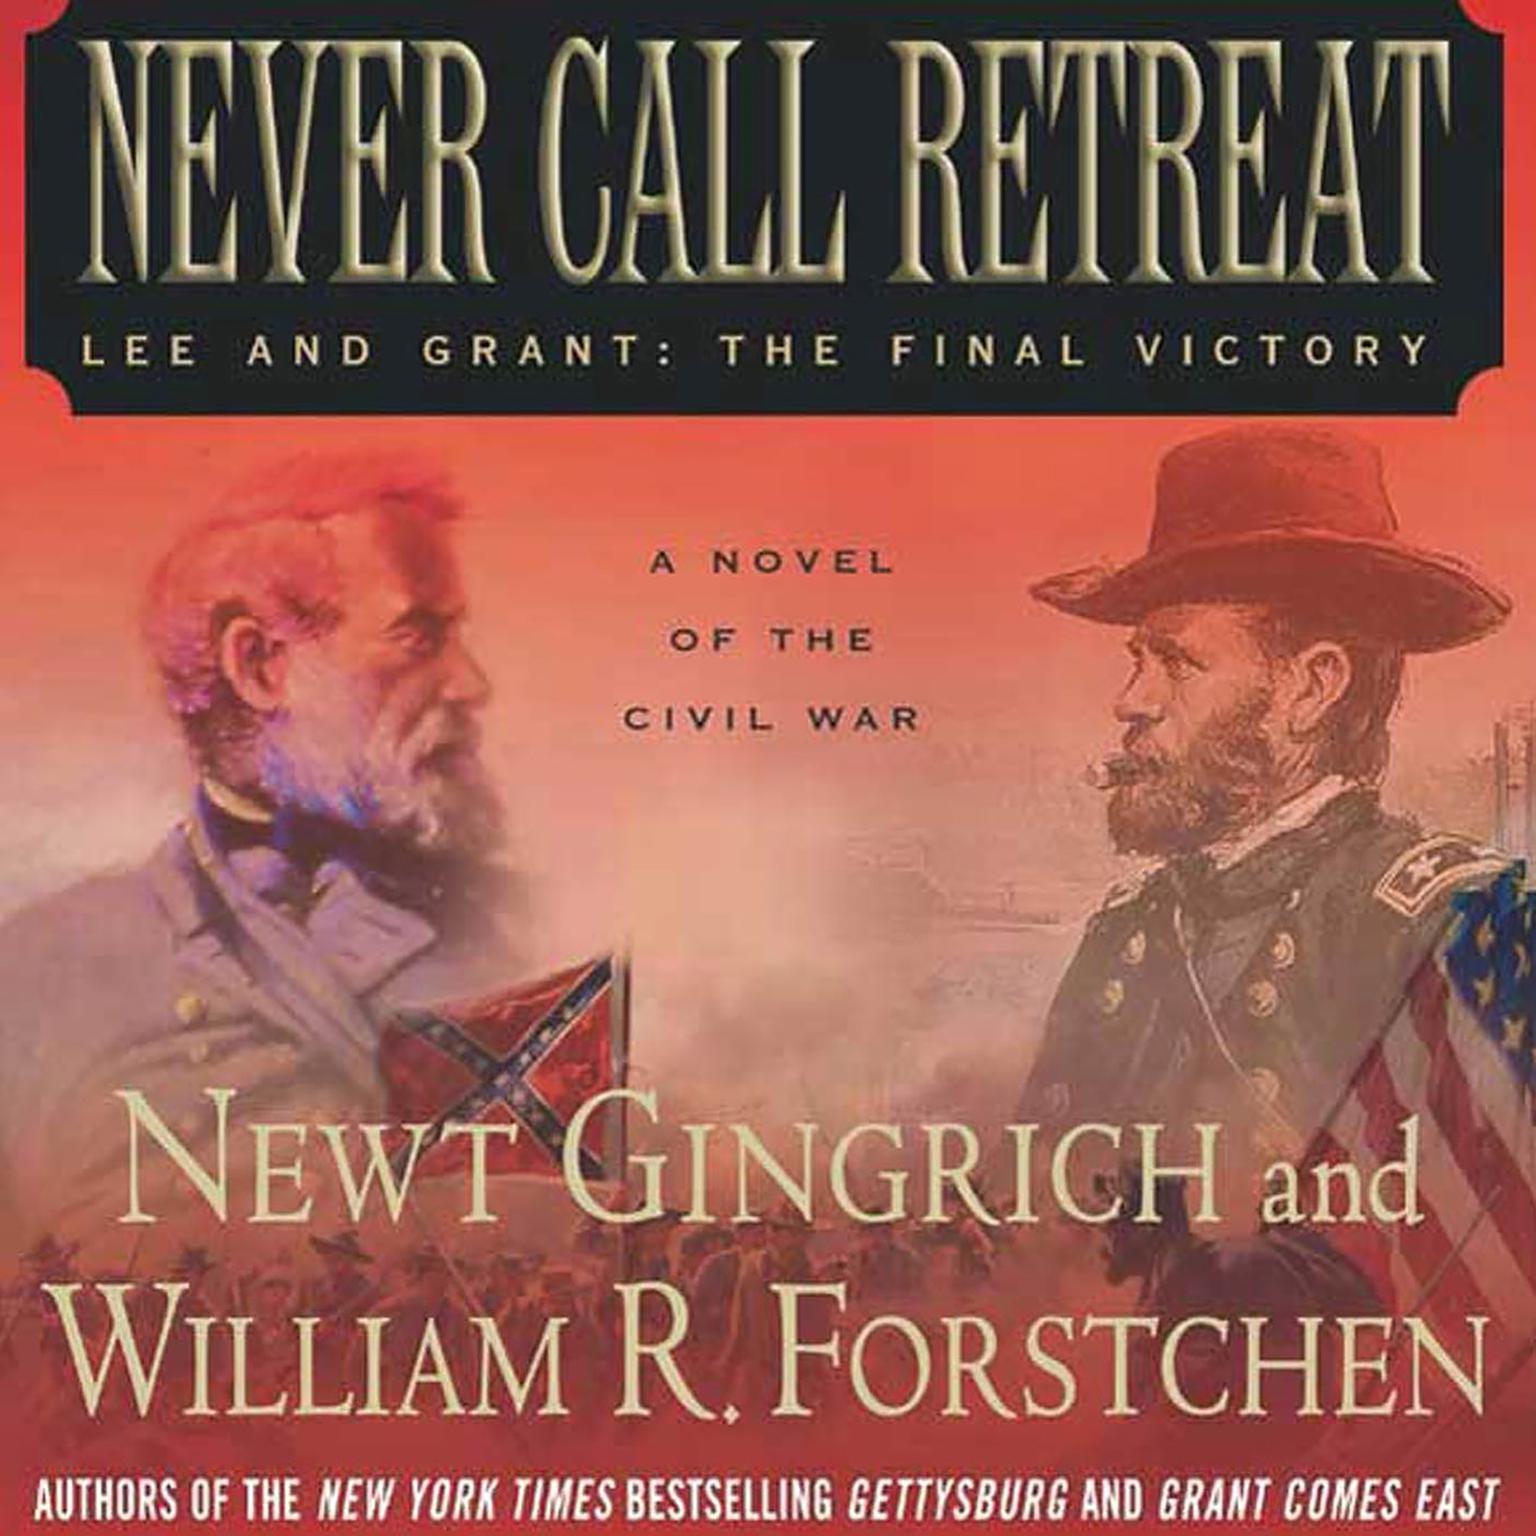 Never Call Retreat (Abridged): Lee and Grant: The Final Victory: A Novel of the Civil War Audiobook, by Newt Gingrich